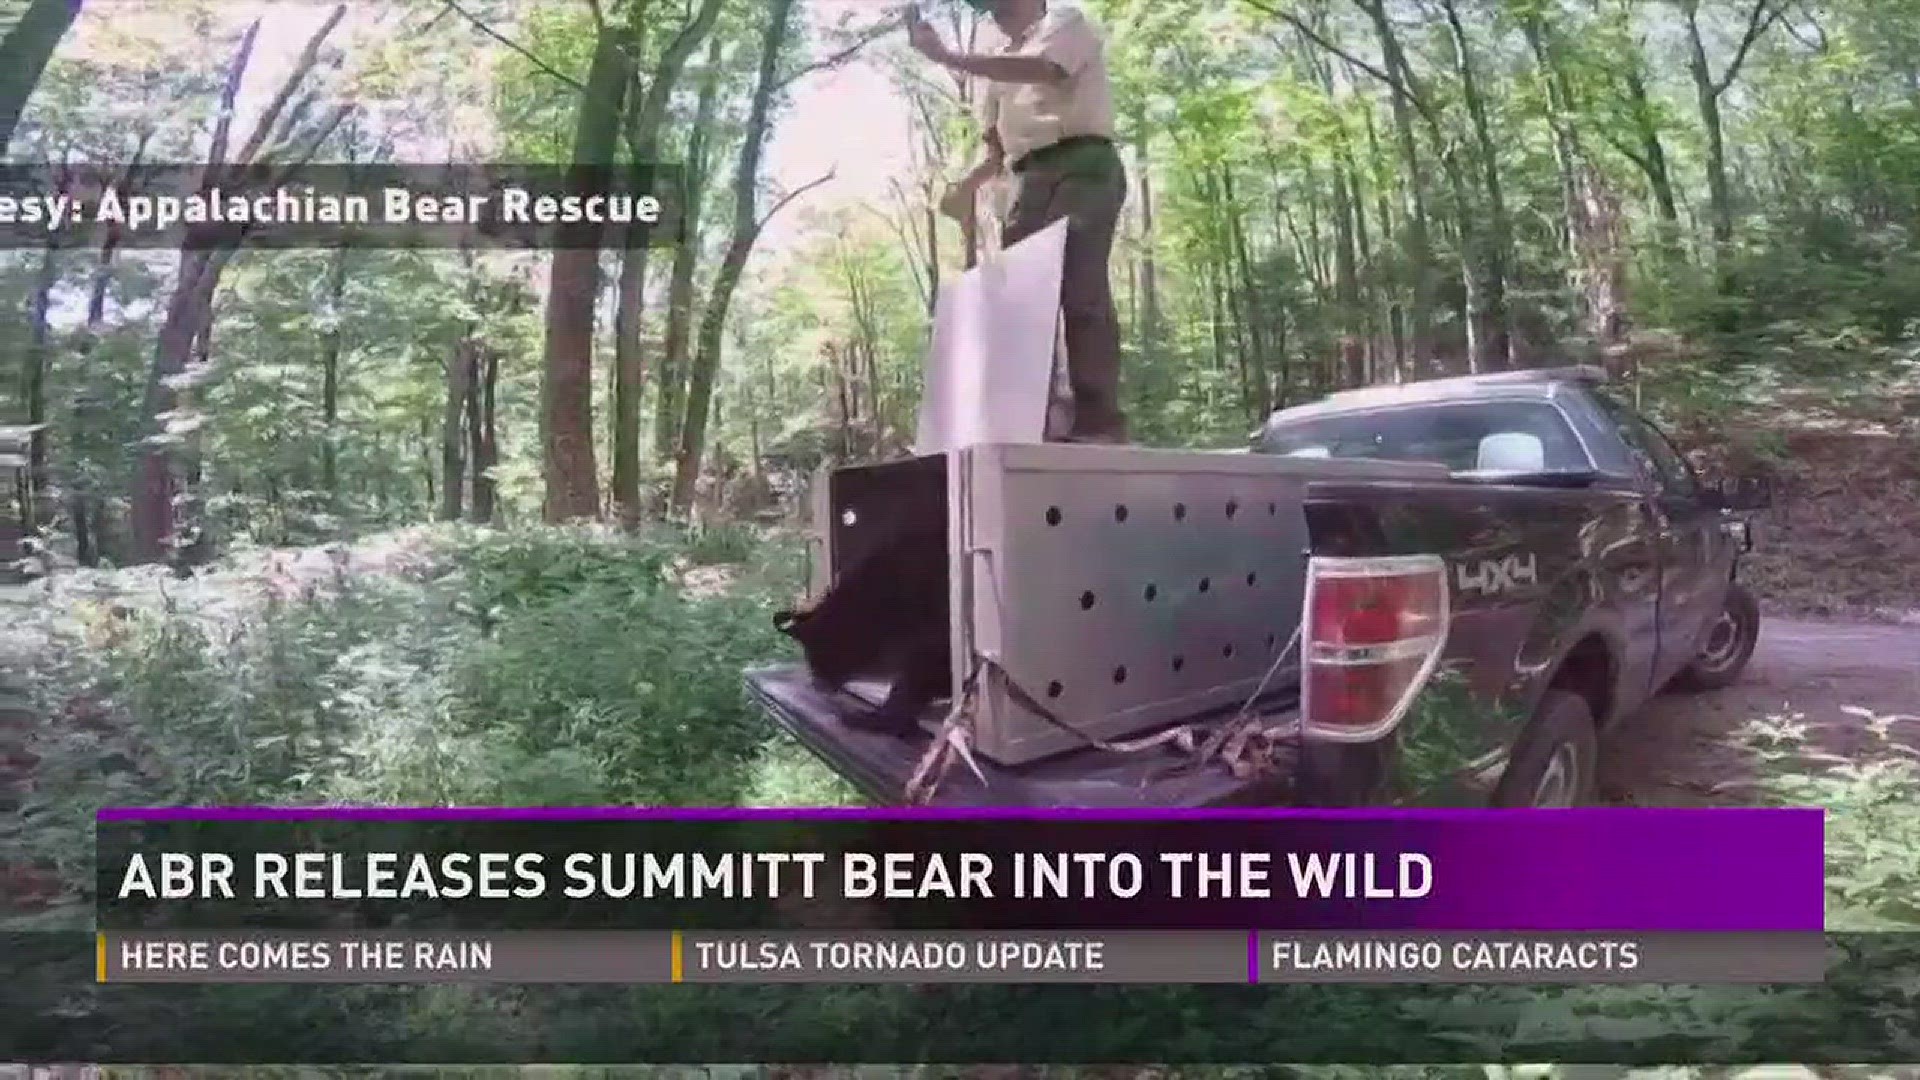 Aug. 7, 2017: Four months after he first came to Appalachian Bear Rescue, Summitt Bear was released back into the wild.